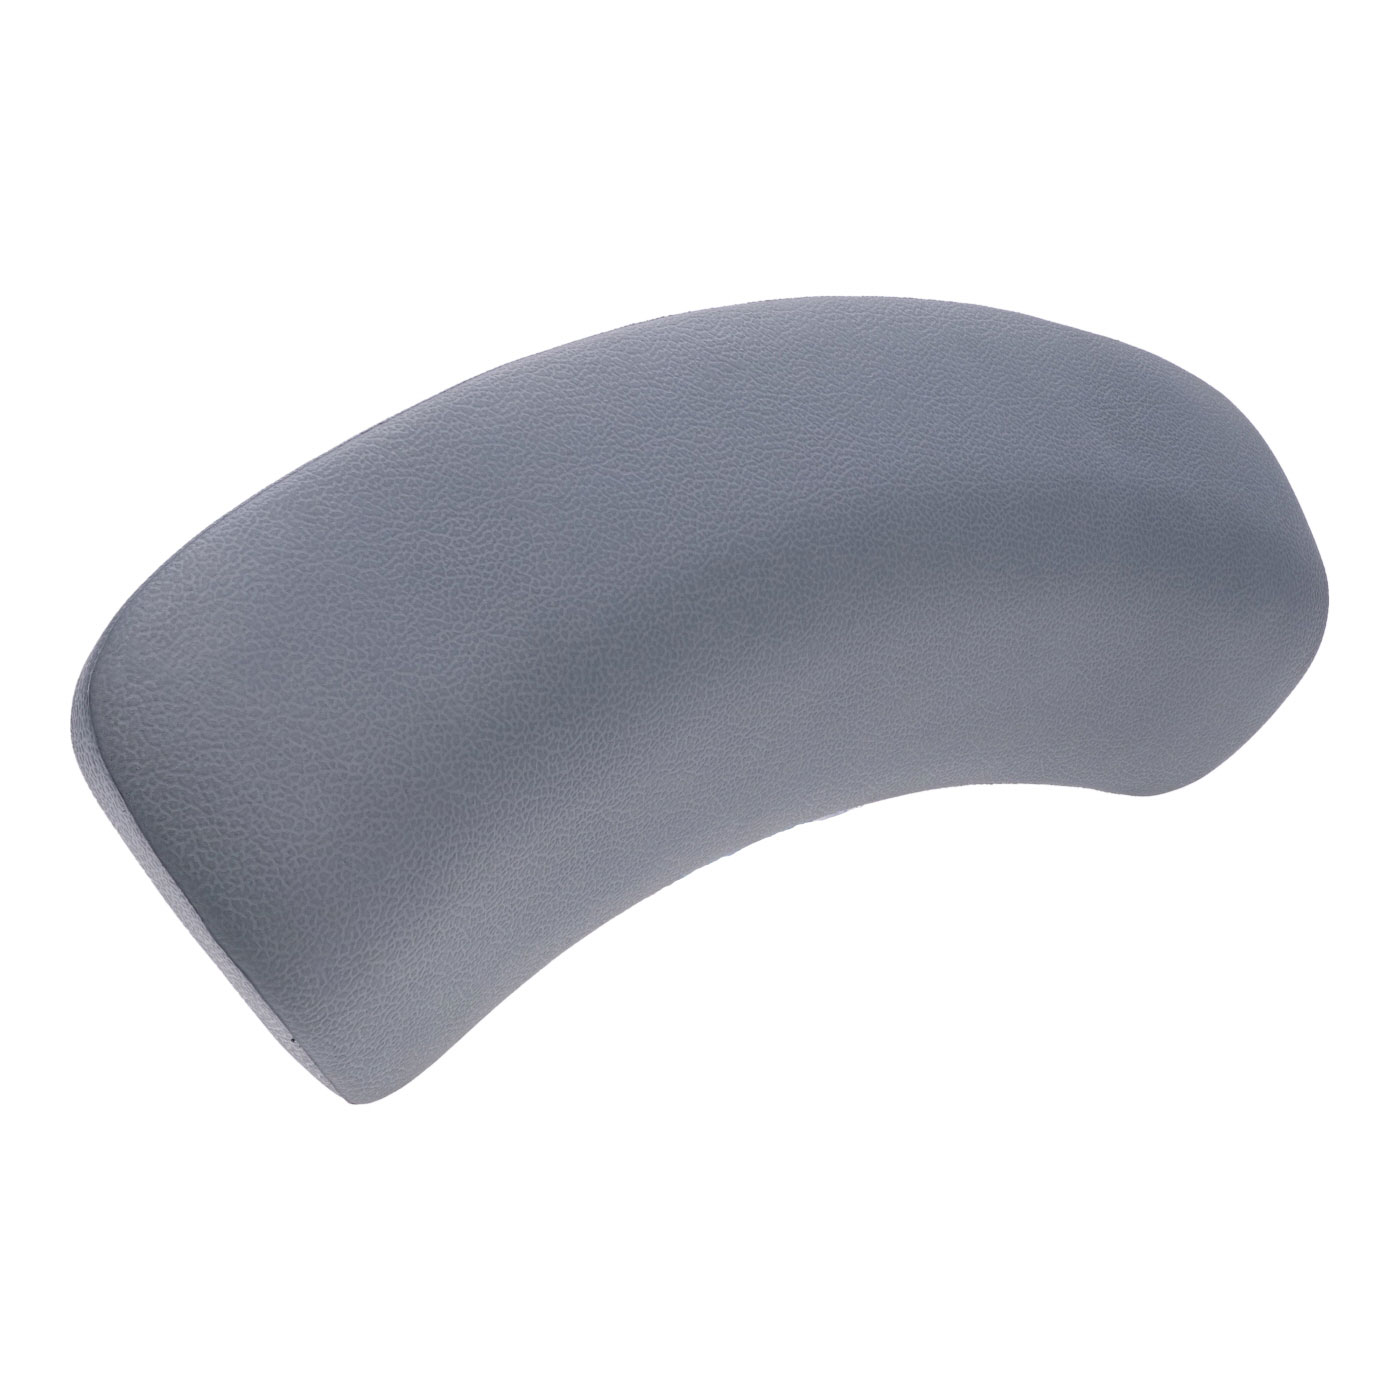 AS0801 Grey Rounded Headrest